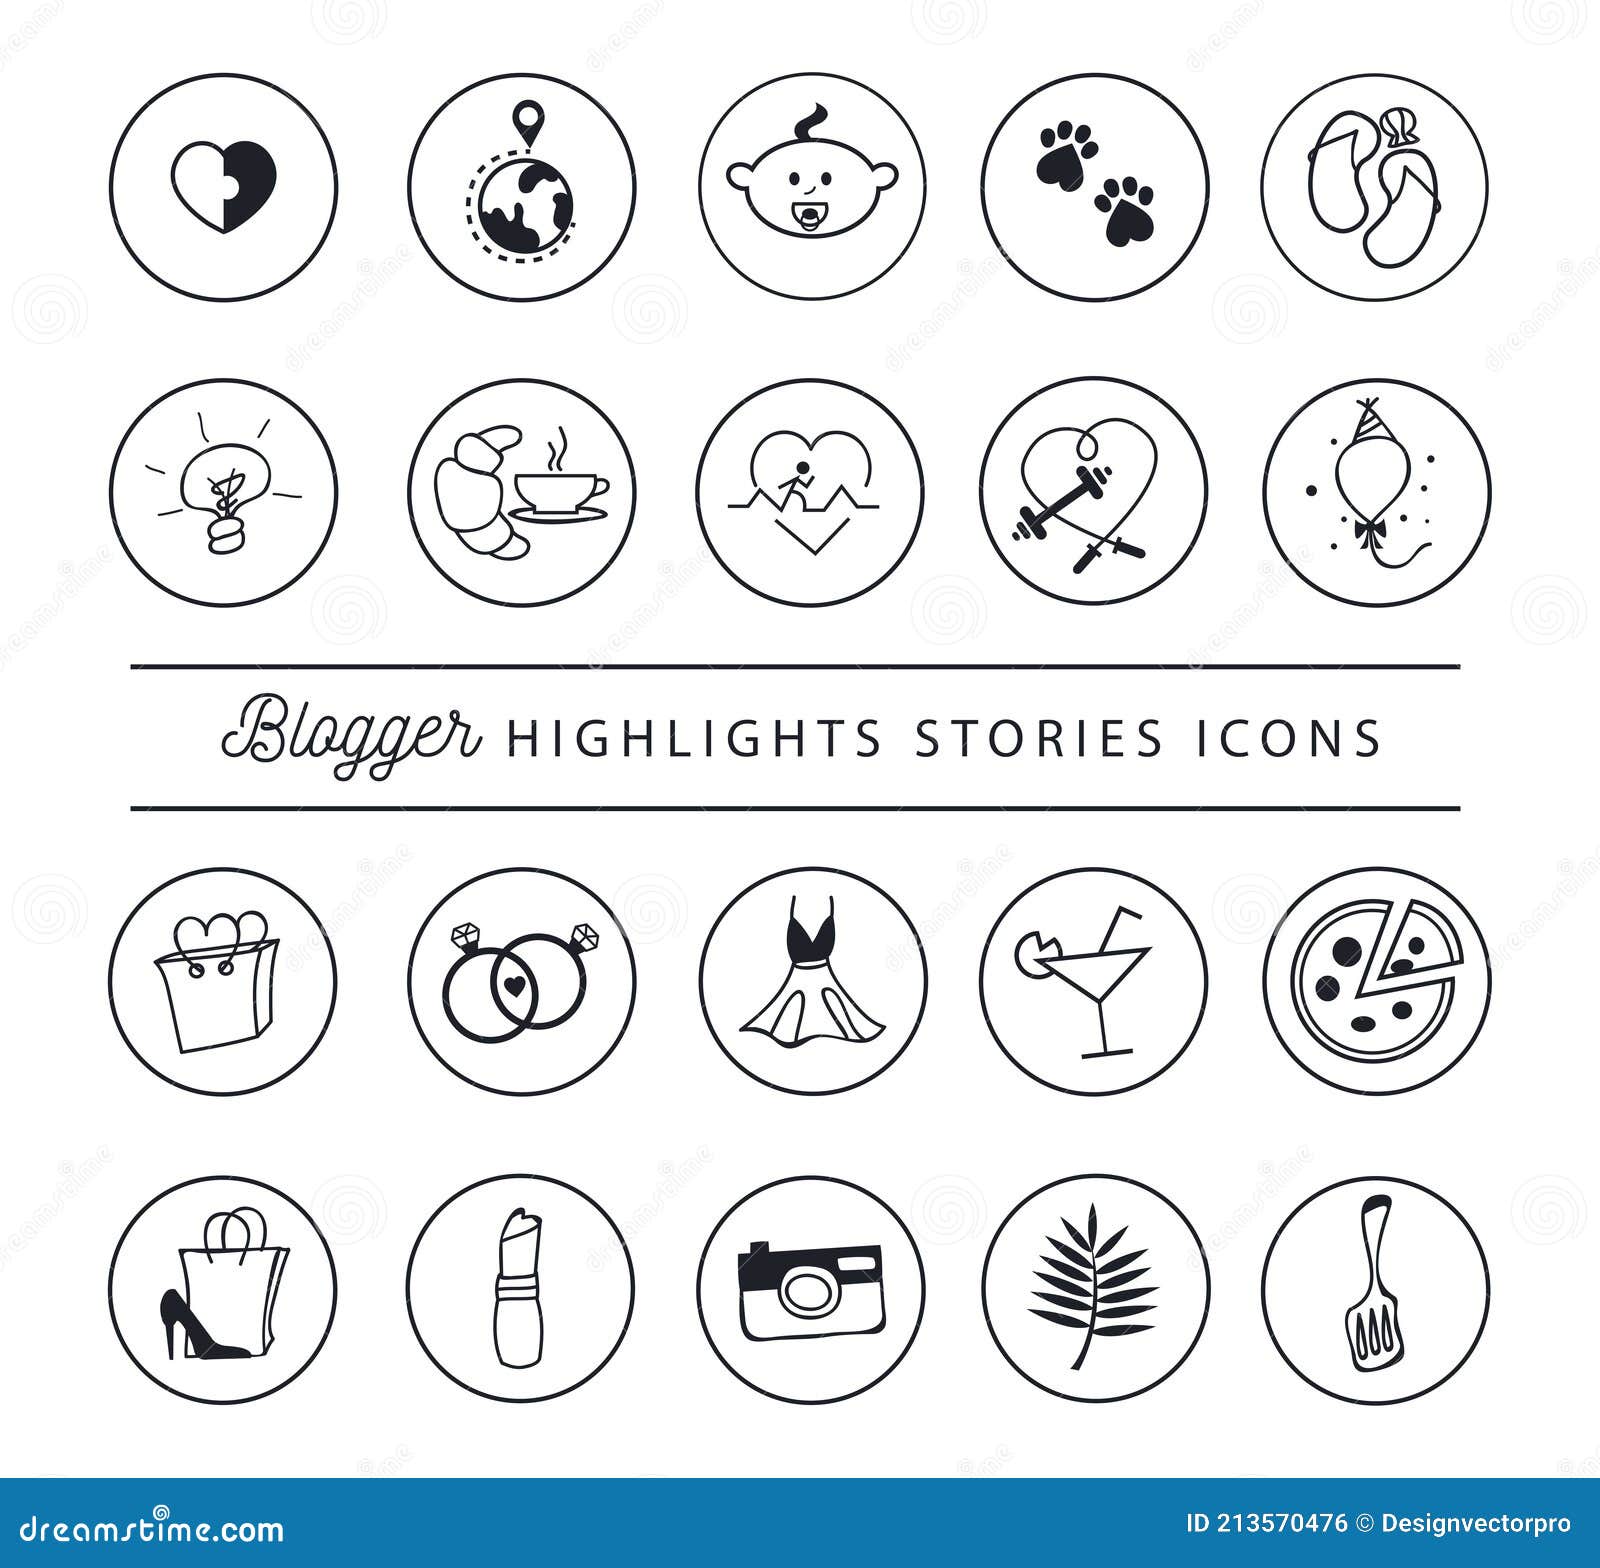 Social Networks Stories Icons. Highlights Icon Set for Blog, Website ...